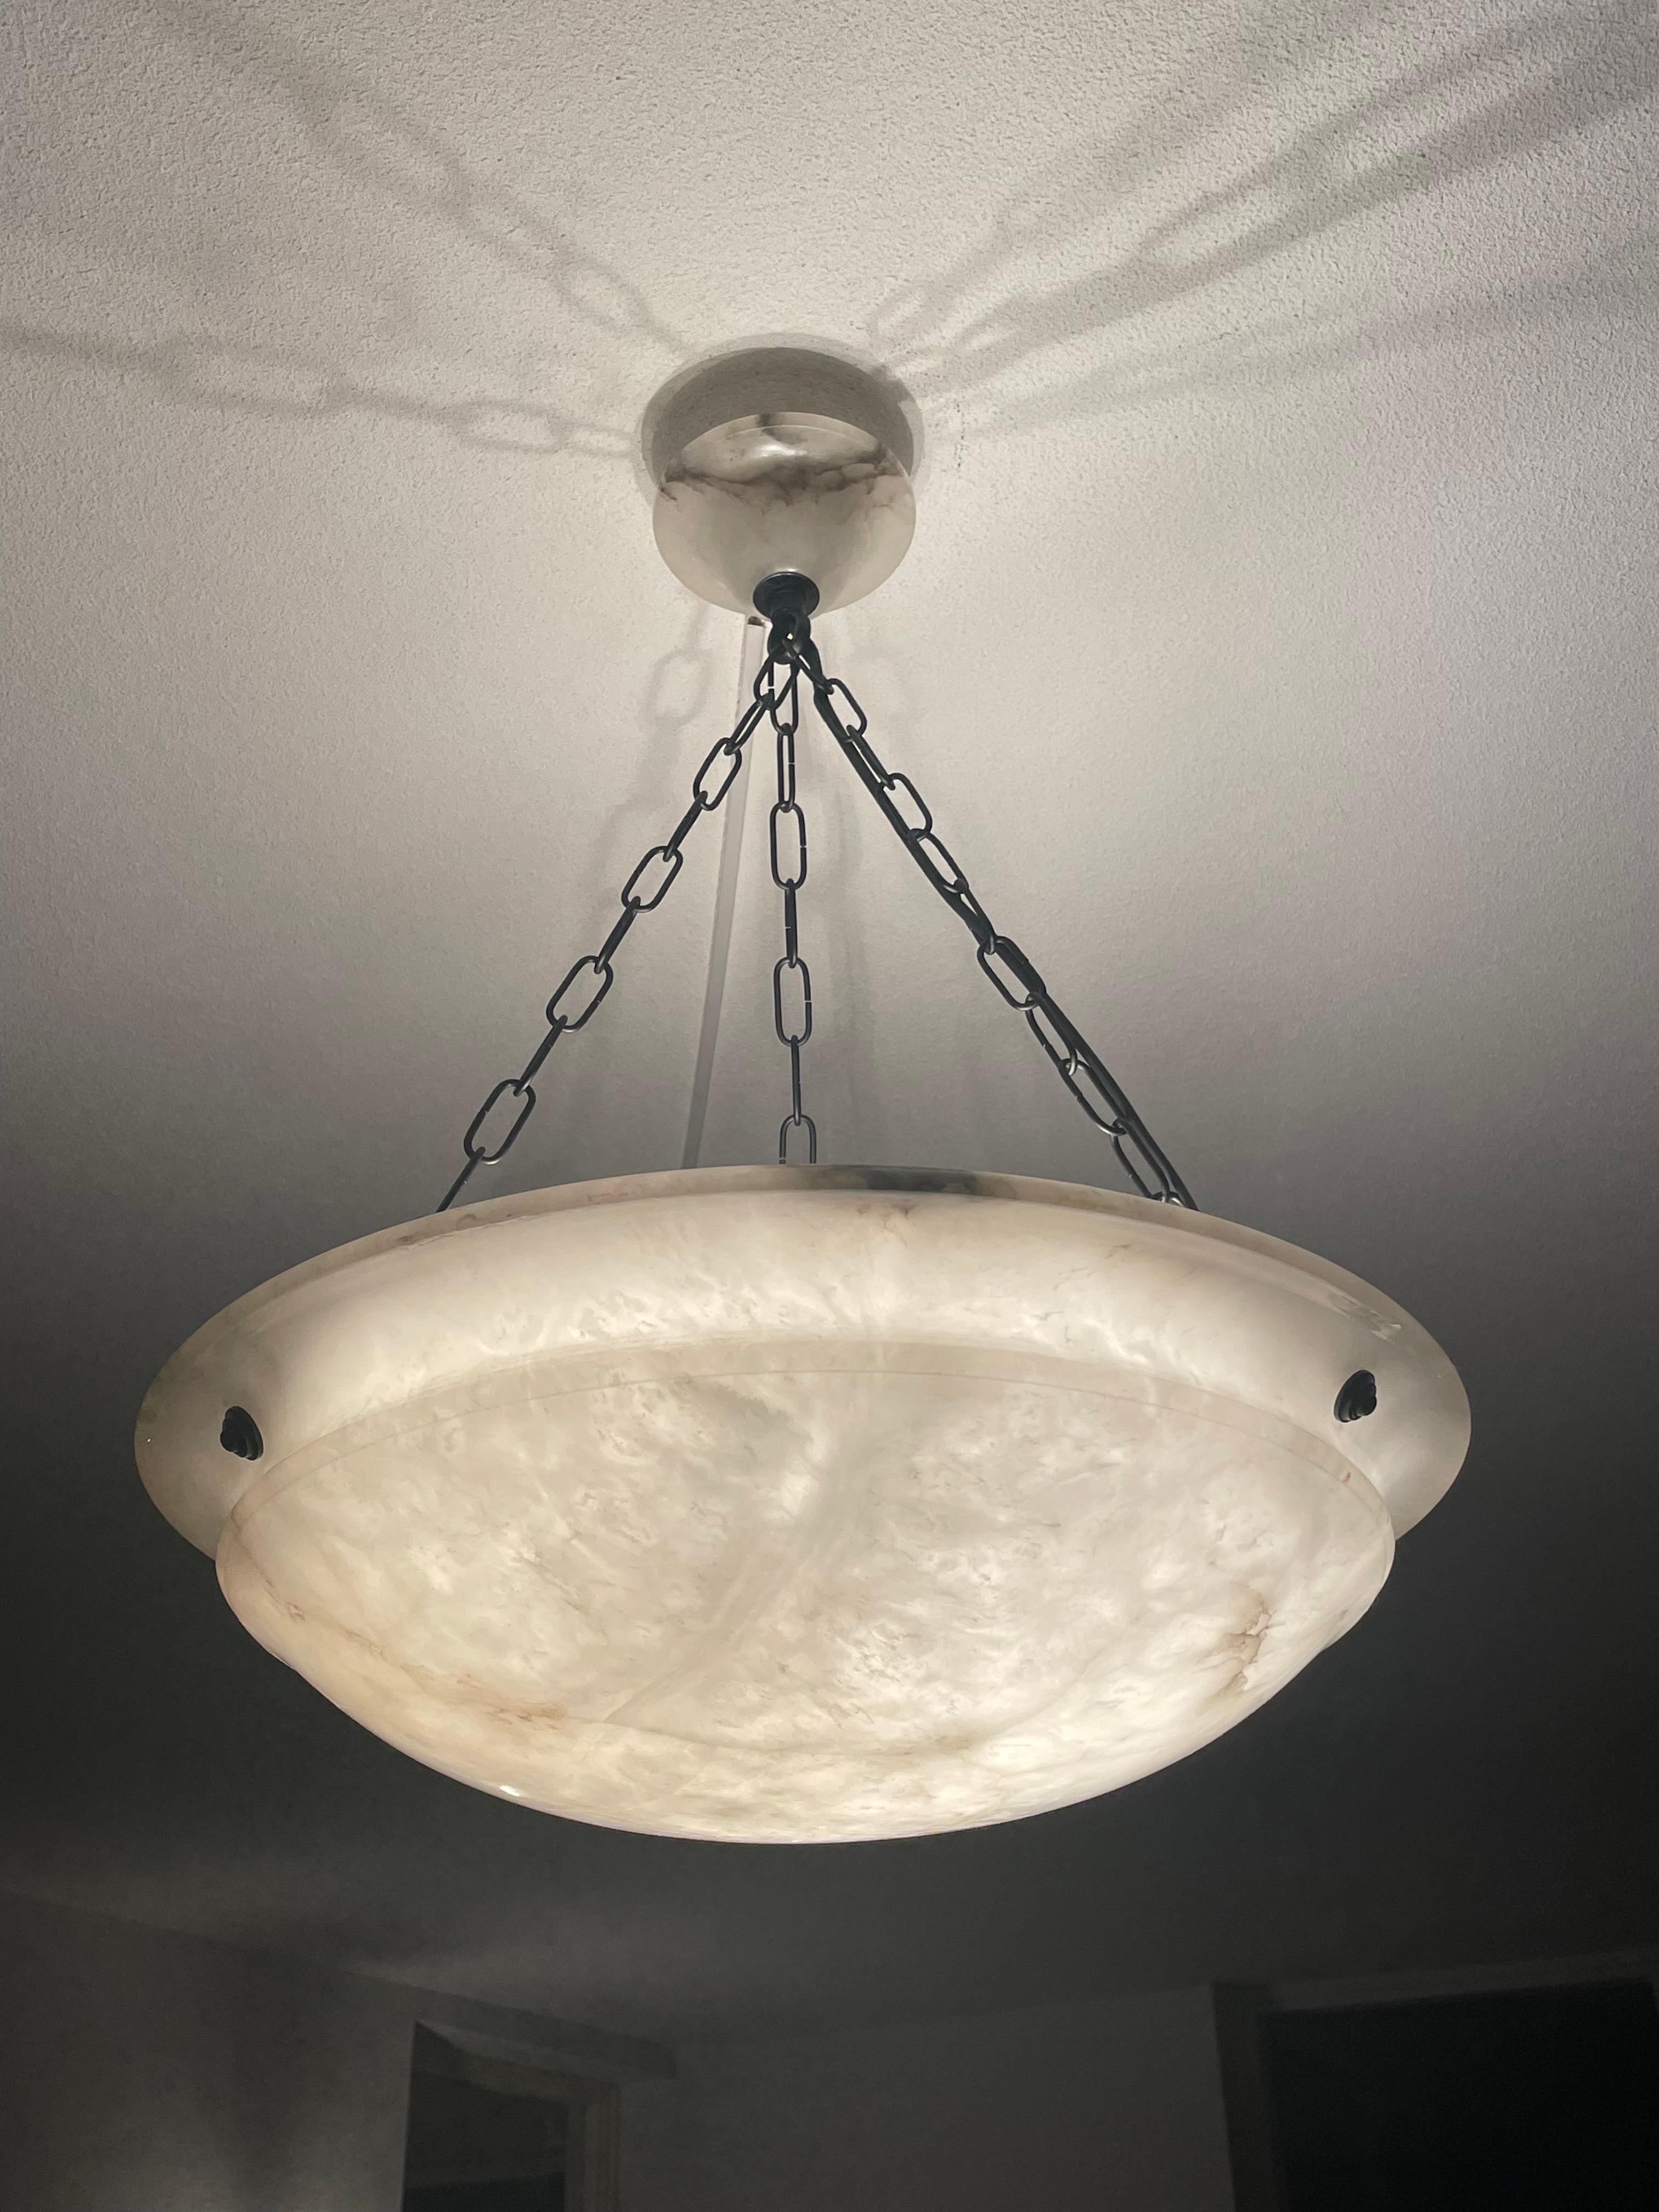 Beautiful and the ideal size 17.8 inches in diameter alabaster light fixture.

Thanks to its large size and timeless design this three light alabaster chandelier from the European Art Deco era is one of the most beautiful models we have seen and